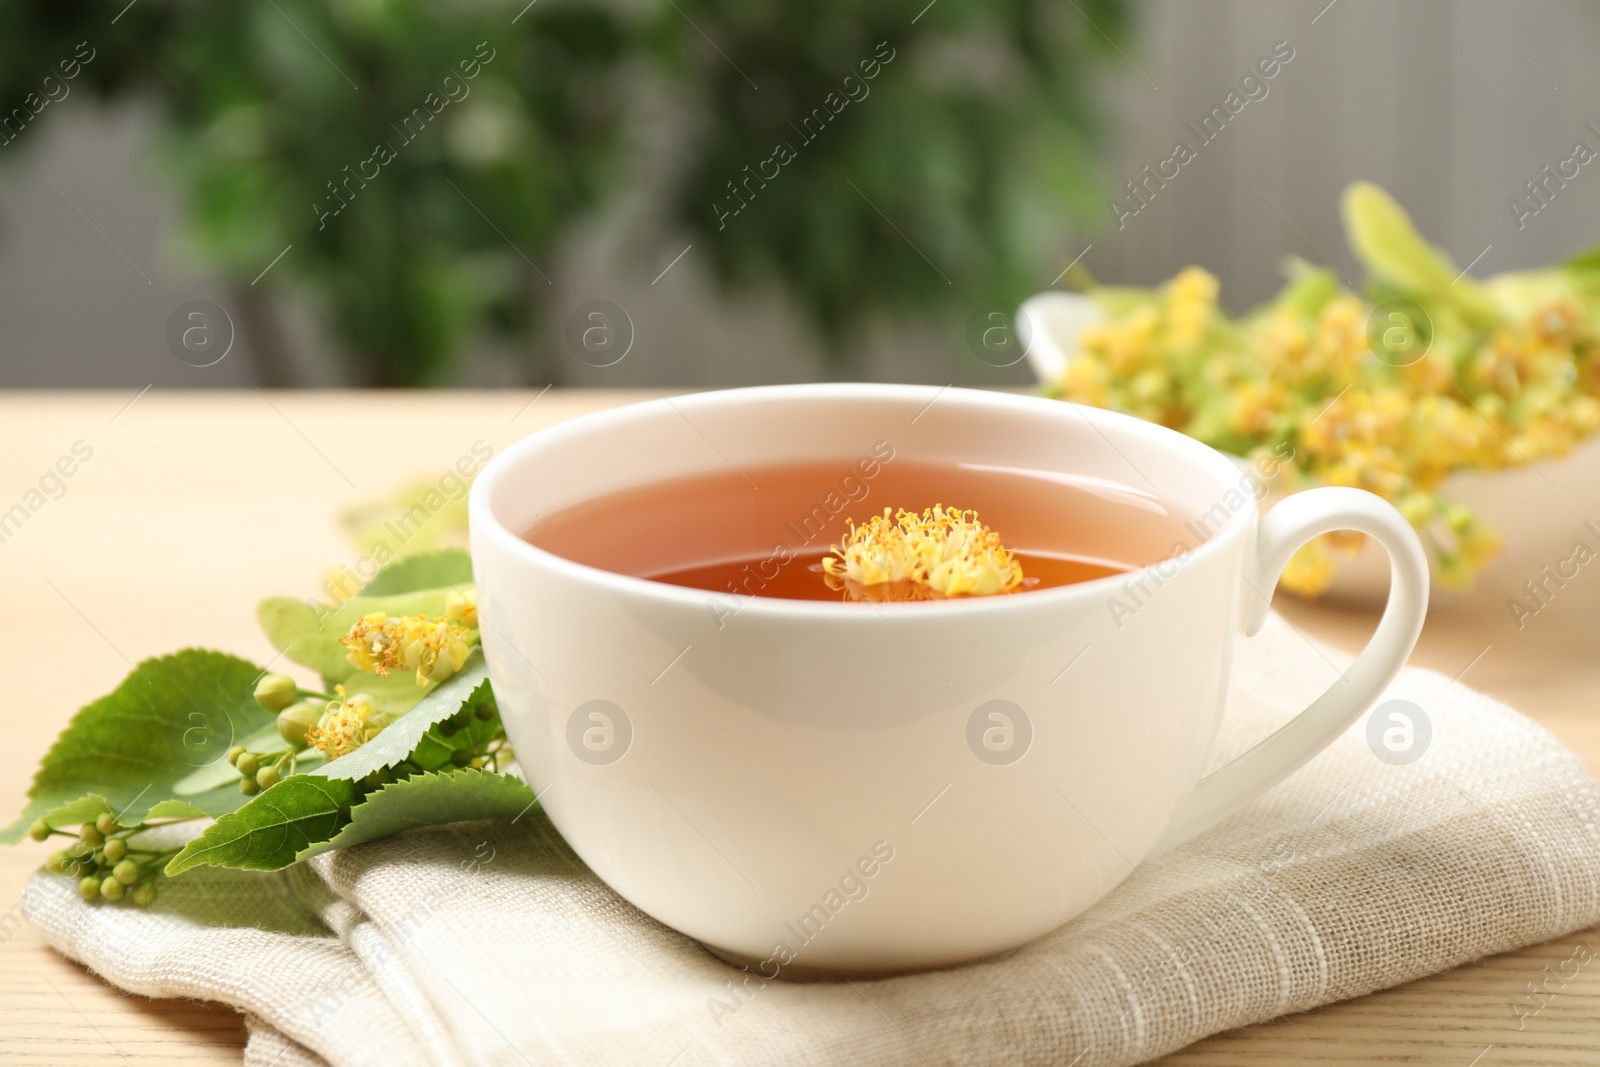 Photo of Cup of tea with linden blossom on wooden table